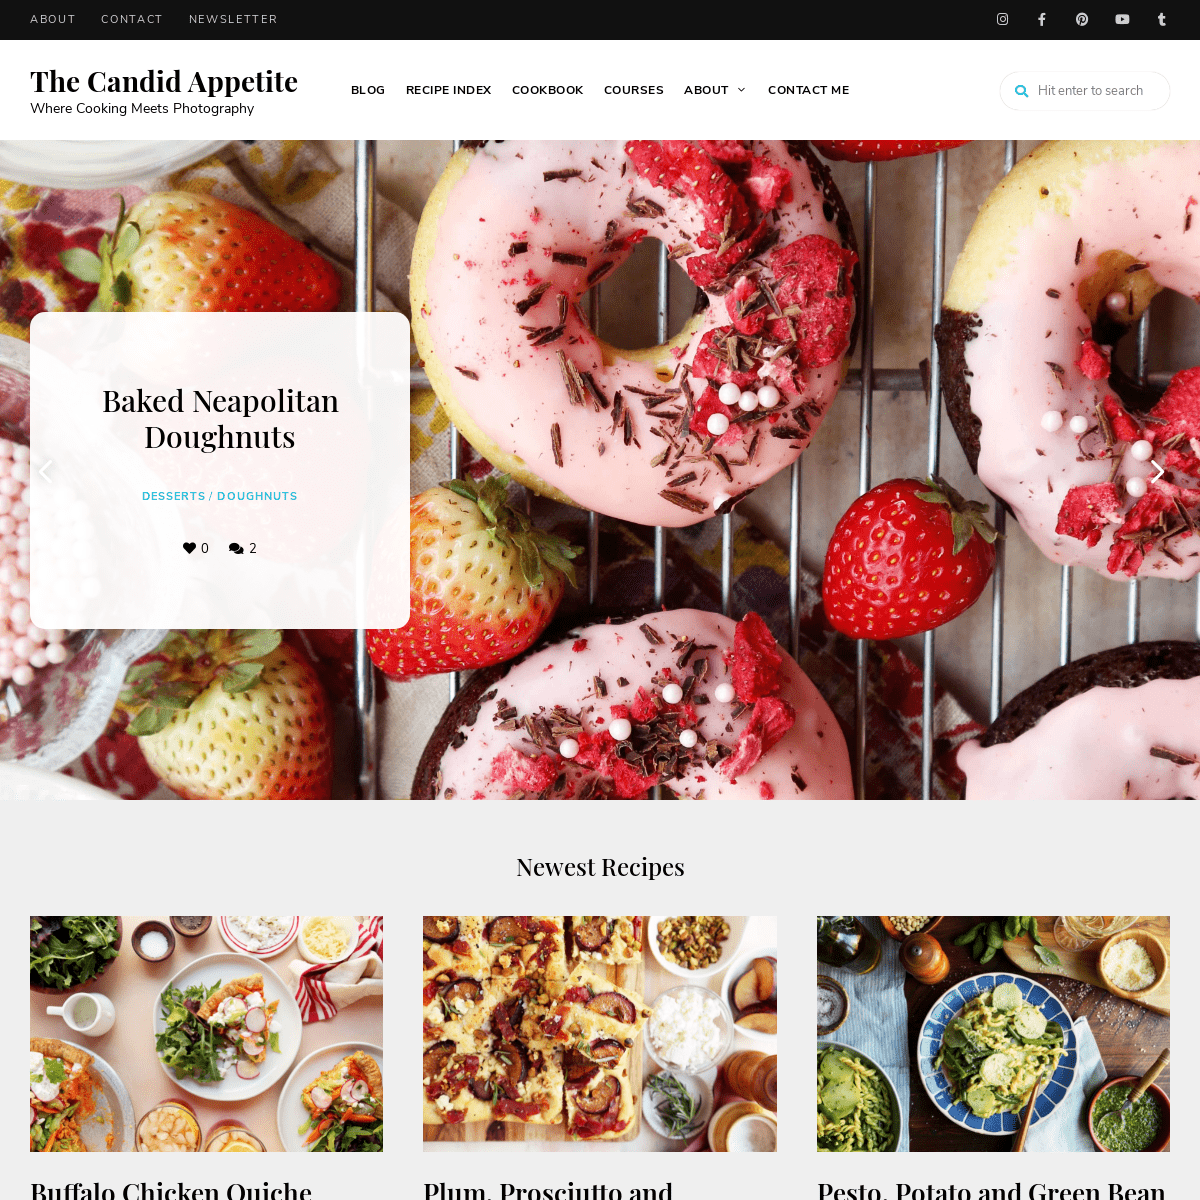 A complete backup of https://thecandidappetite.com